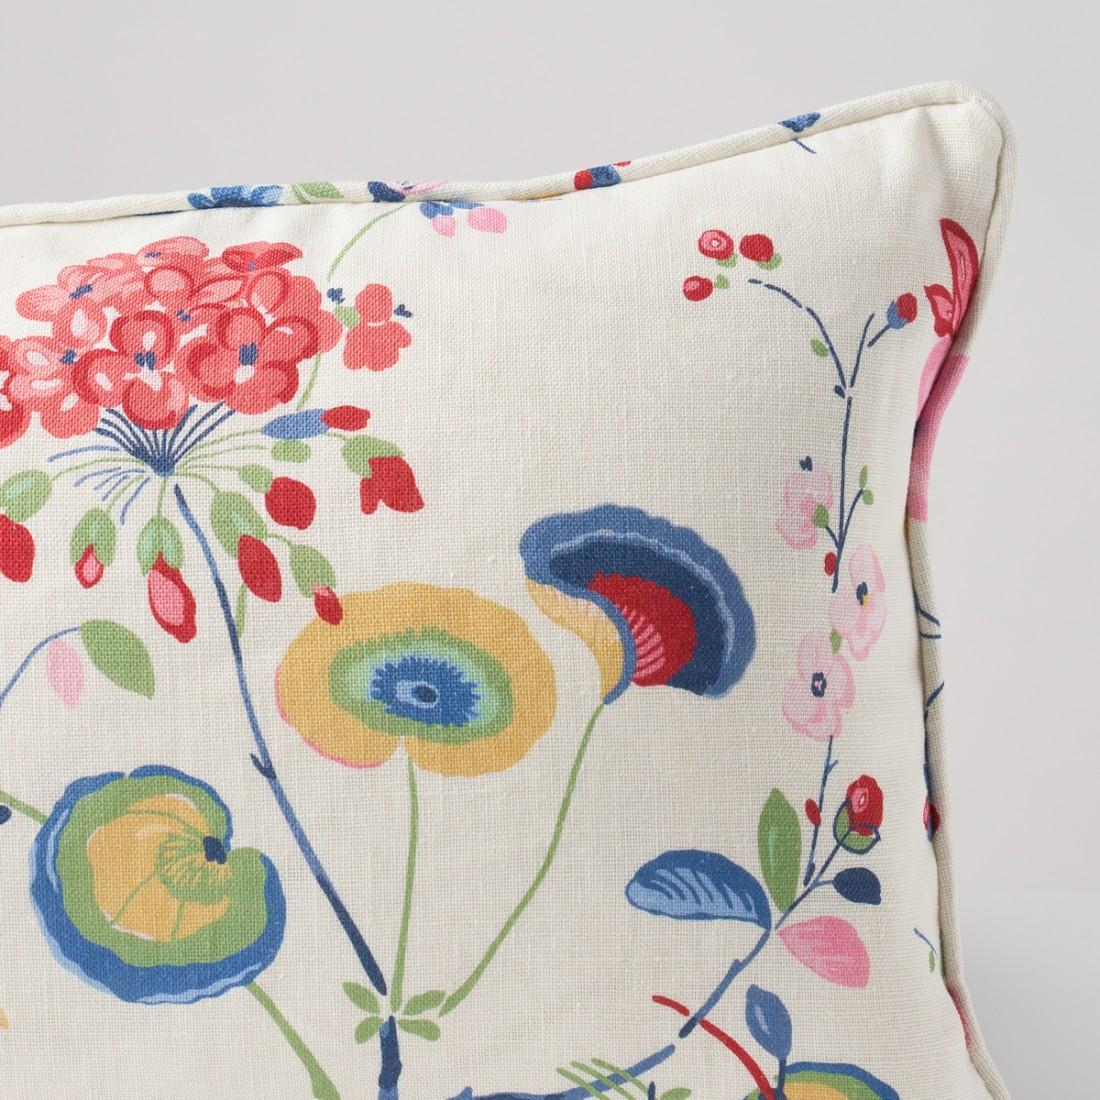 This pillow features Vasily Linen with a self welt finish. Artfully abstracted, Vasily Linen in multi is based on a 1930s pattern with a quirky, sophisticated sensibility. Decorated with geraniums, peculiar berries and fruit-like forms, this printed